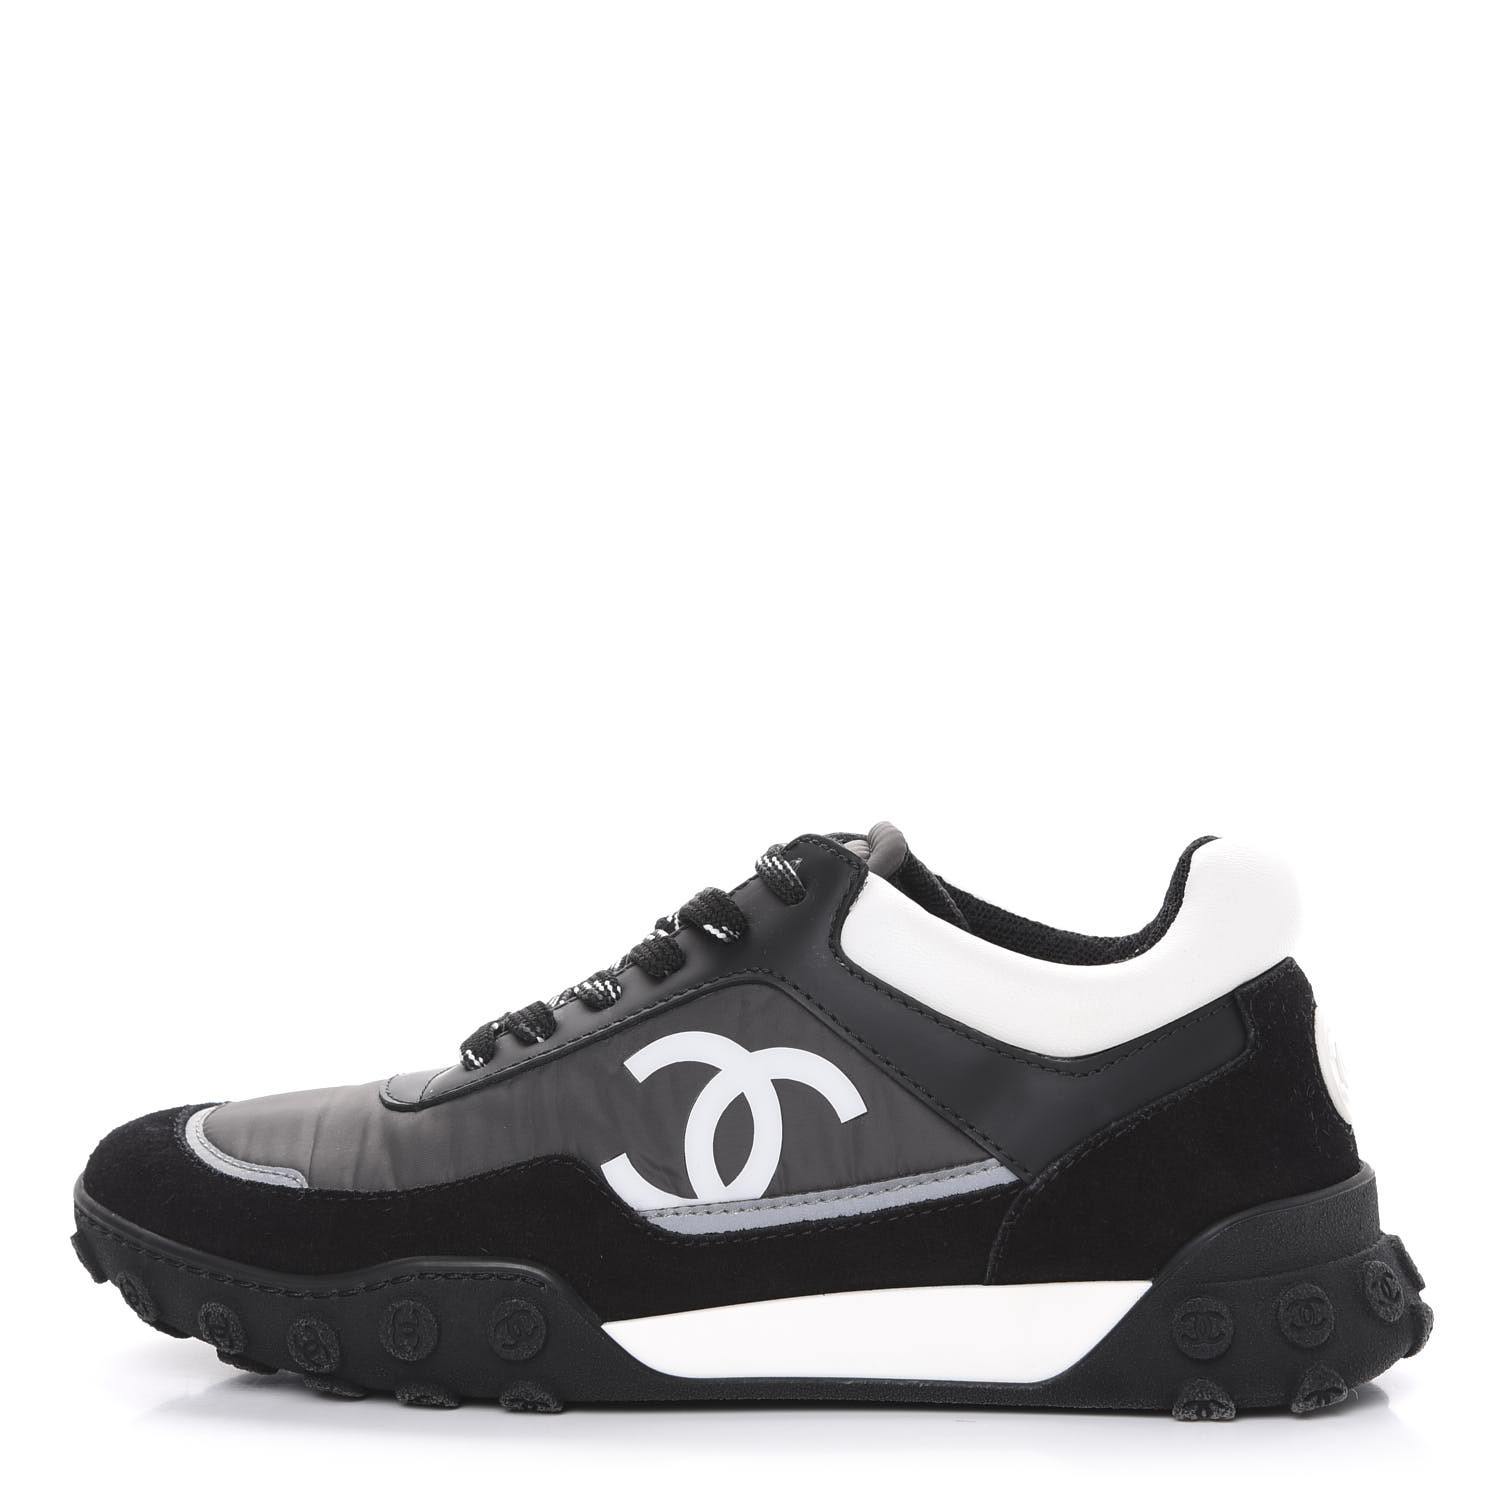 CHANEL Nylon Calfskin Suede CC Sneakers 